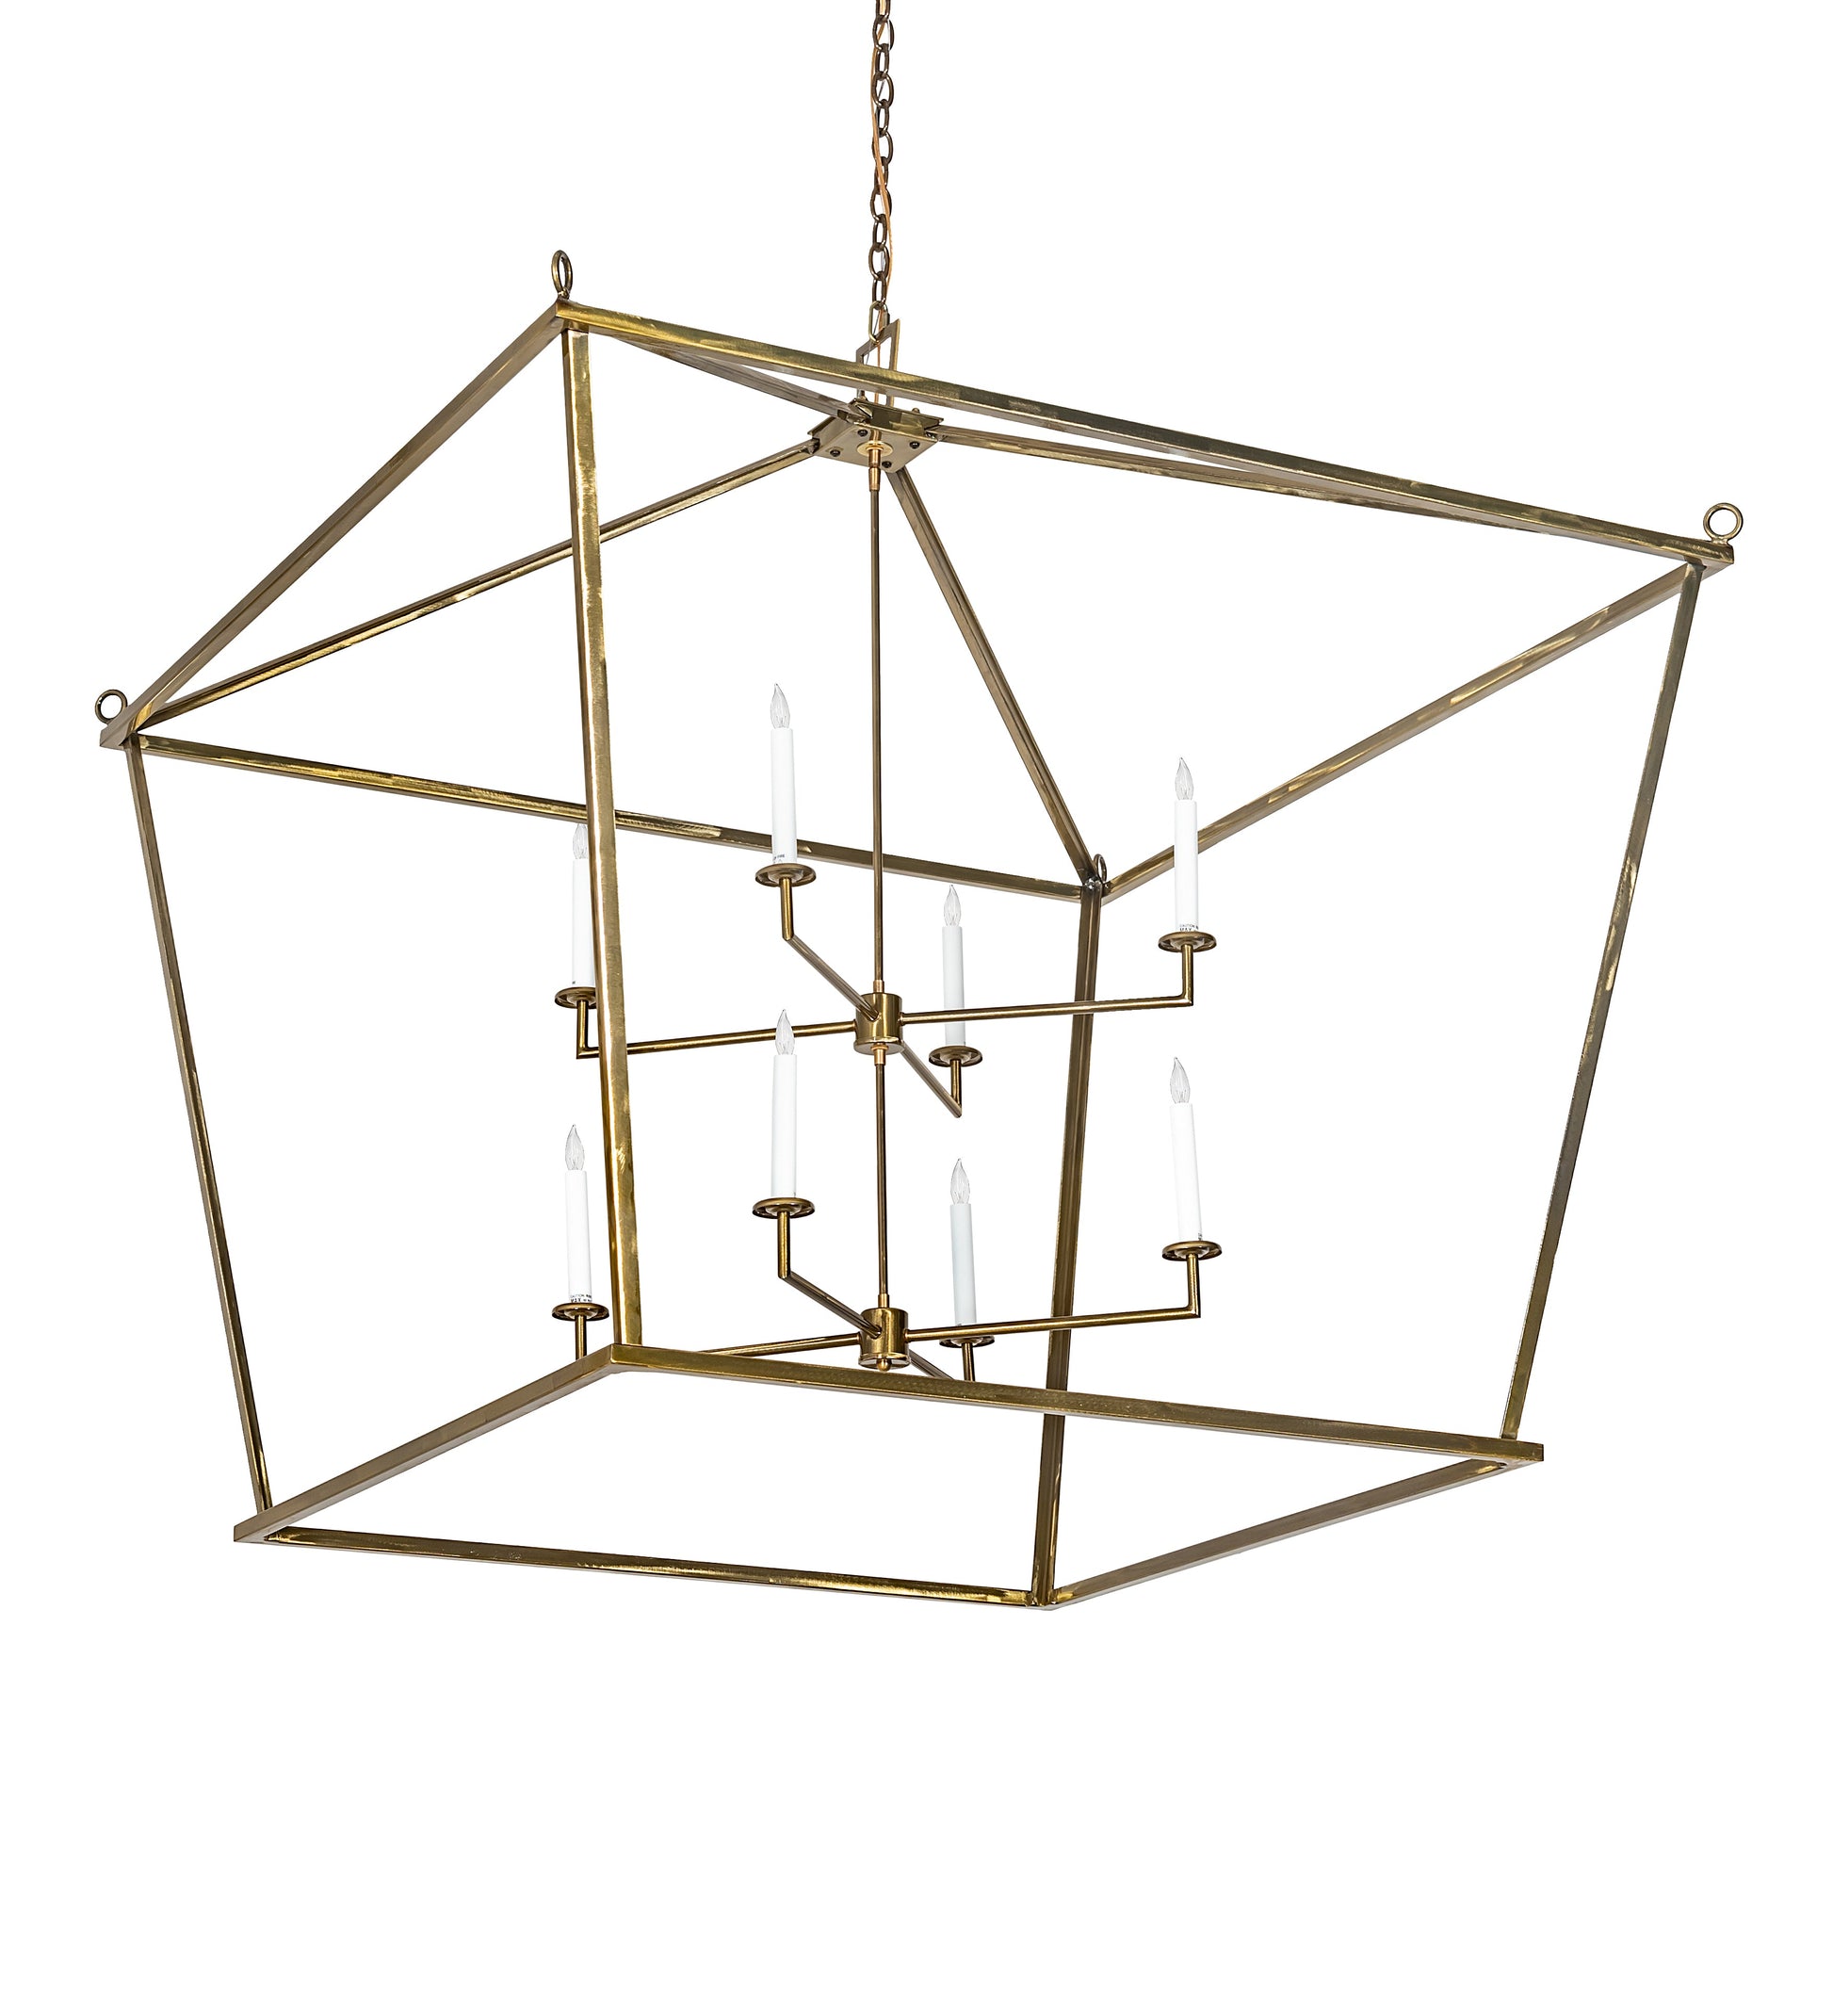 50" Square Kitzi Tapered Pendant by 2nd Ave Lighting